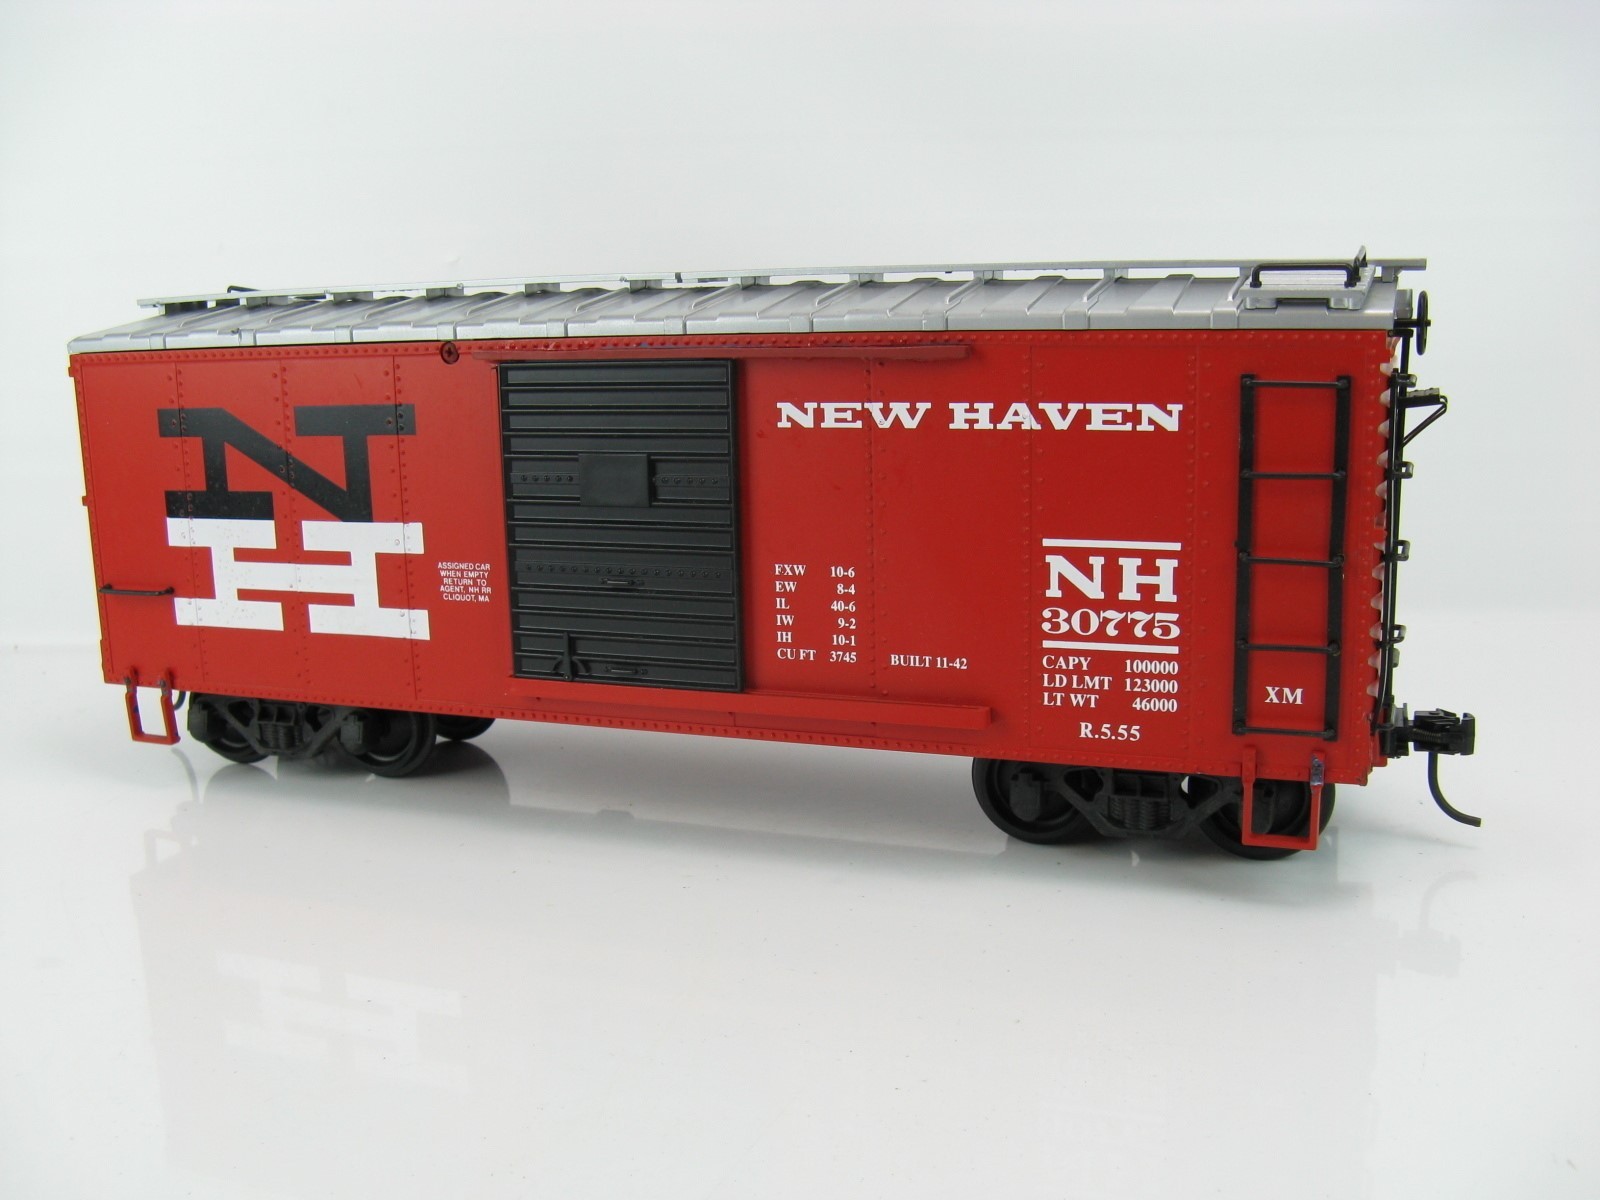 R1927 New Haven NH 30775